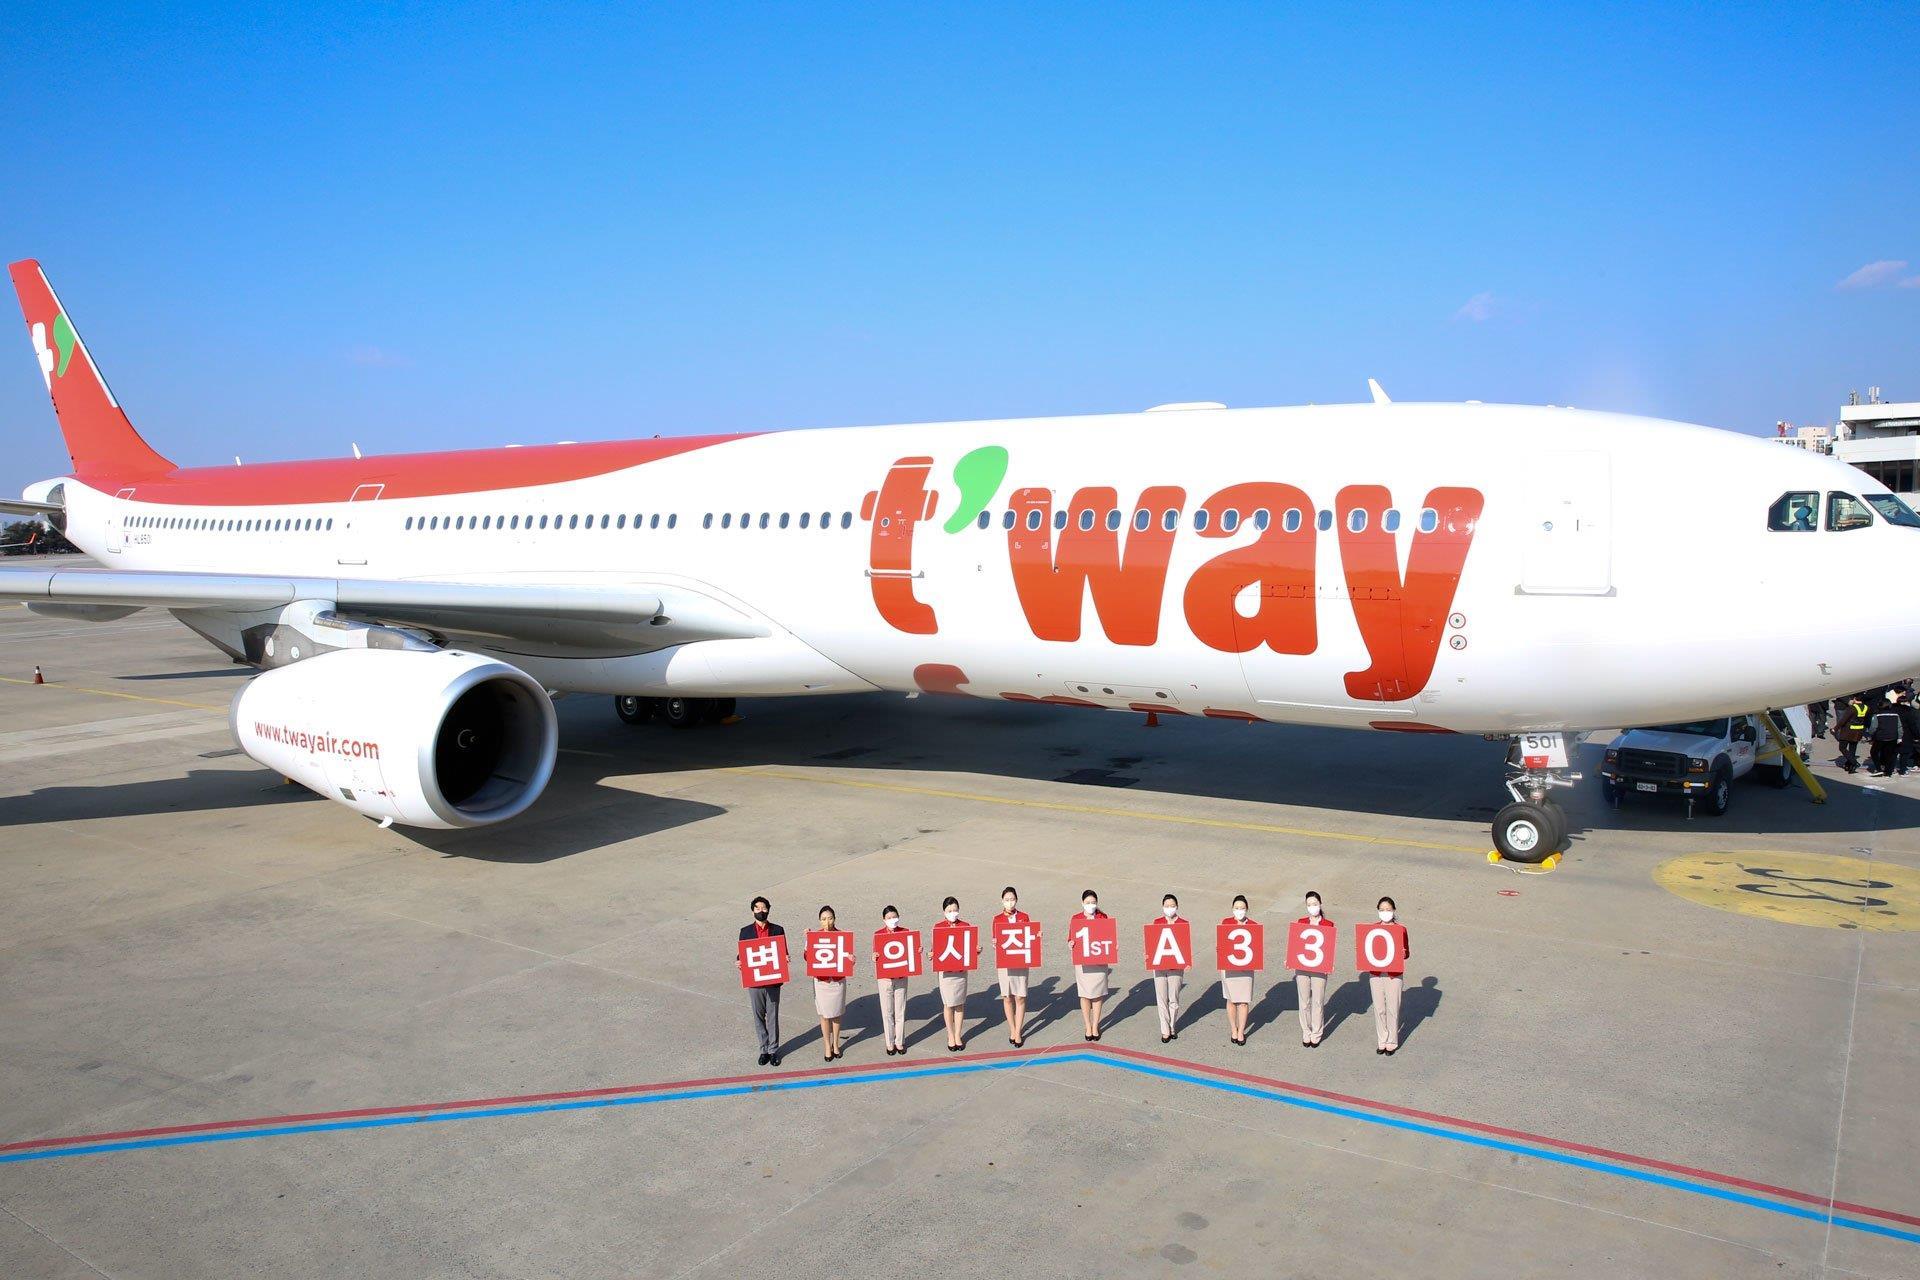 South Korea's T'way joins widebody club with A330 arrival | News